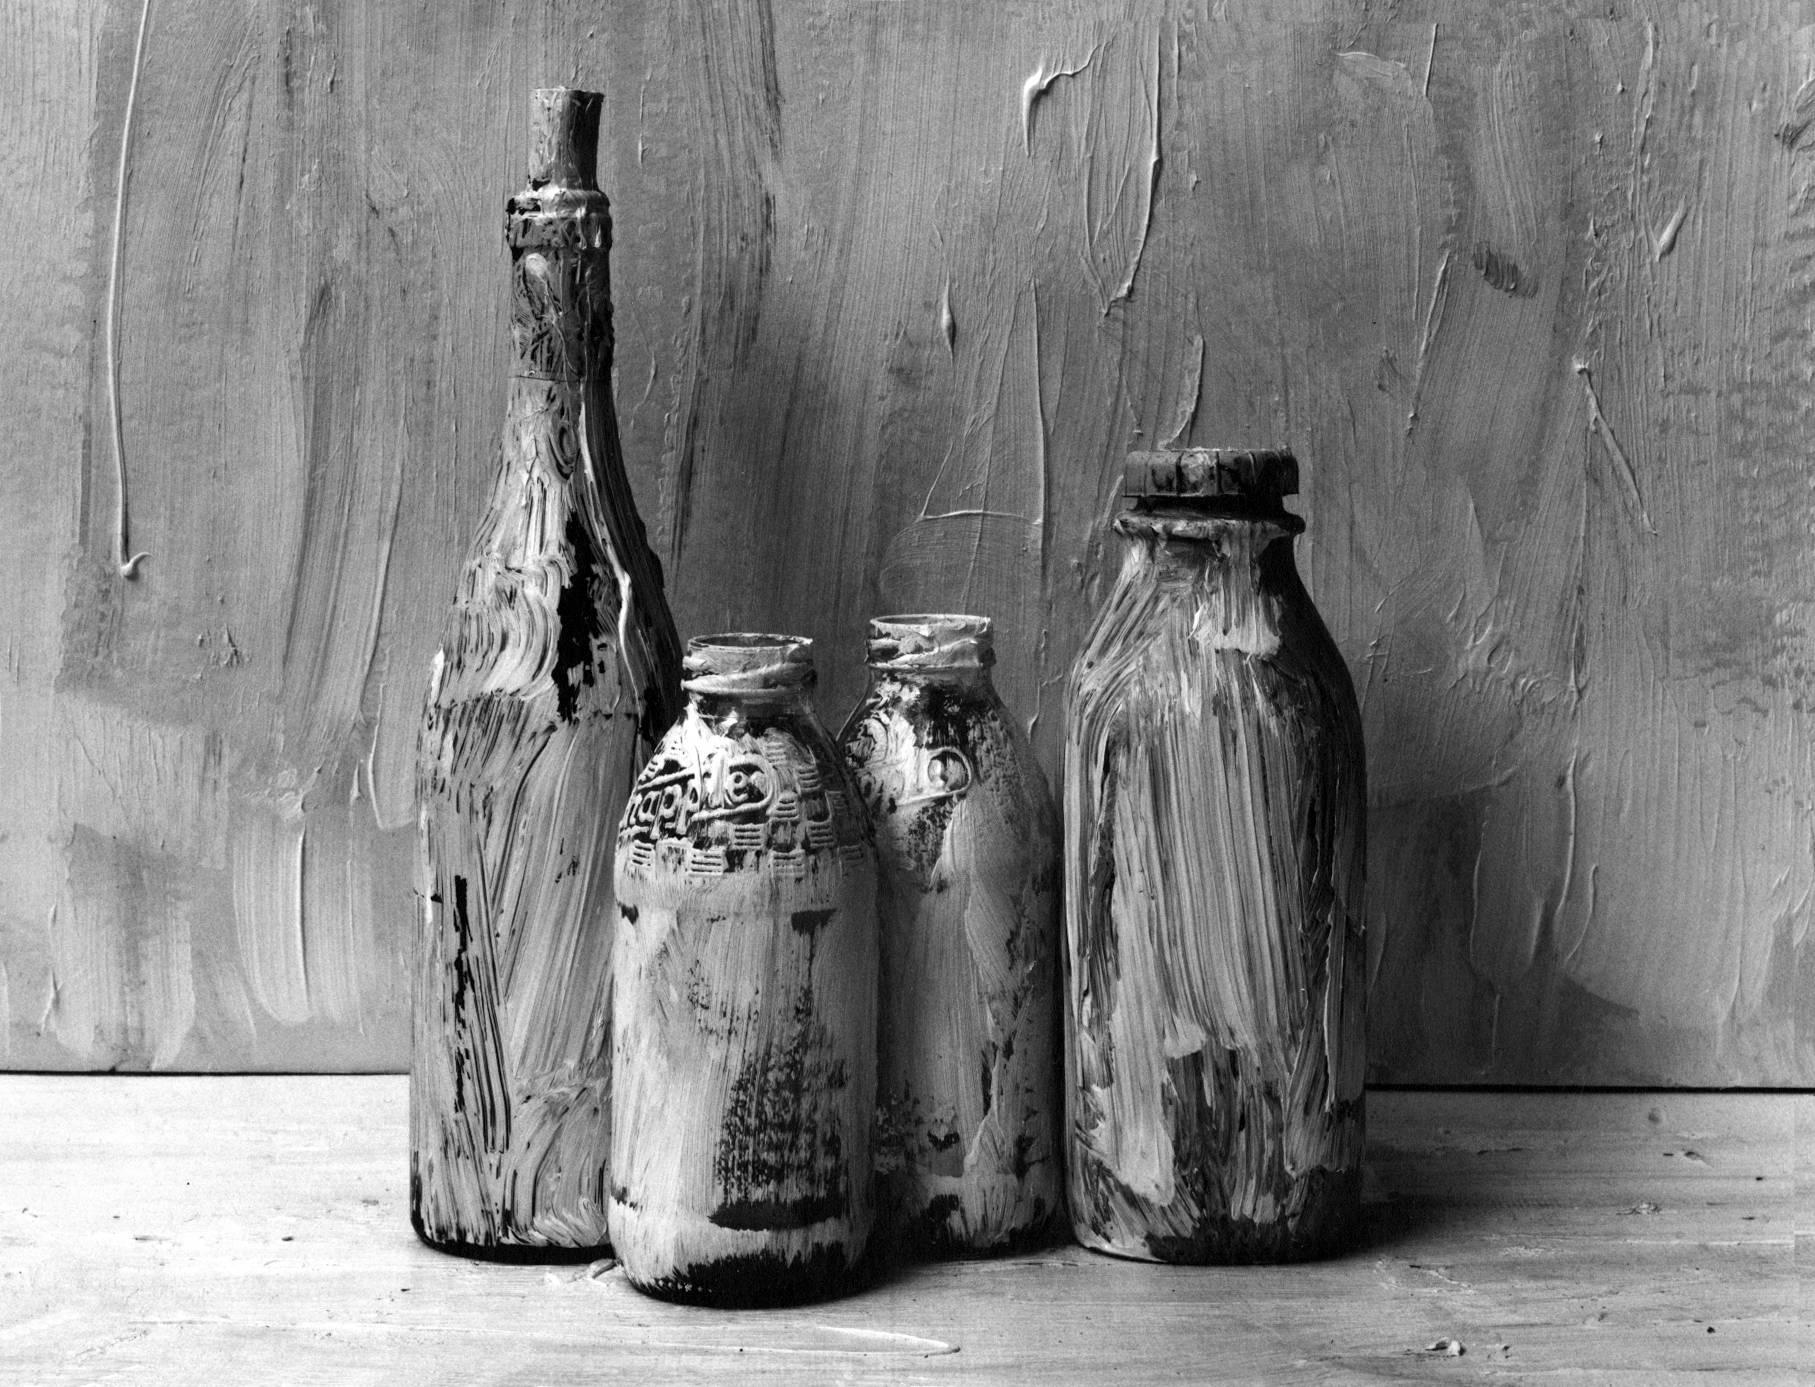 Alexandra Catiere Still-Life Print - Homage to Morandi, Black and white still life photography, Painted Bottles